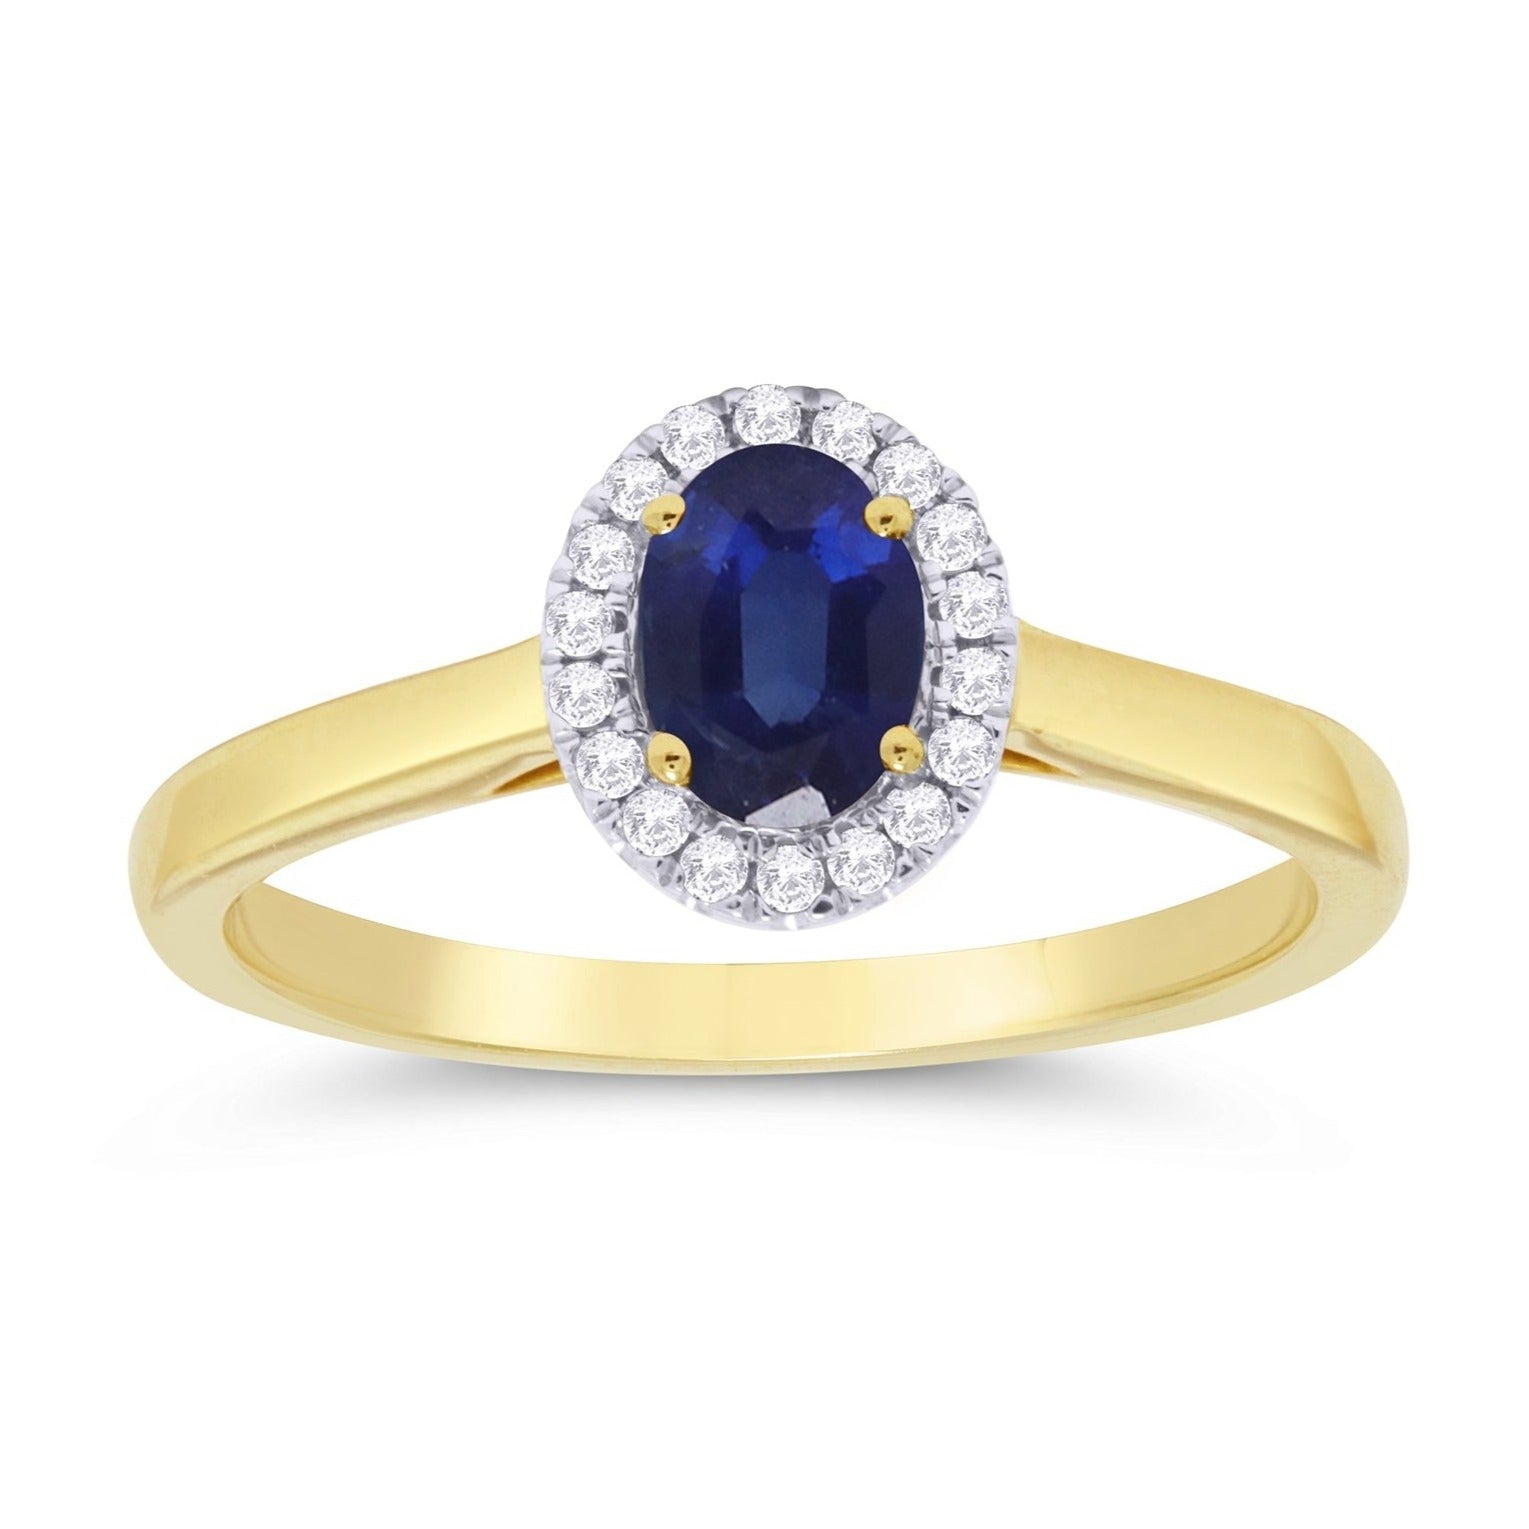 9ct gold 6x4mm oval sapphire & diamond cluster ring 0.10ct